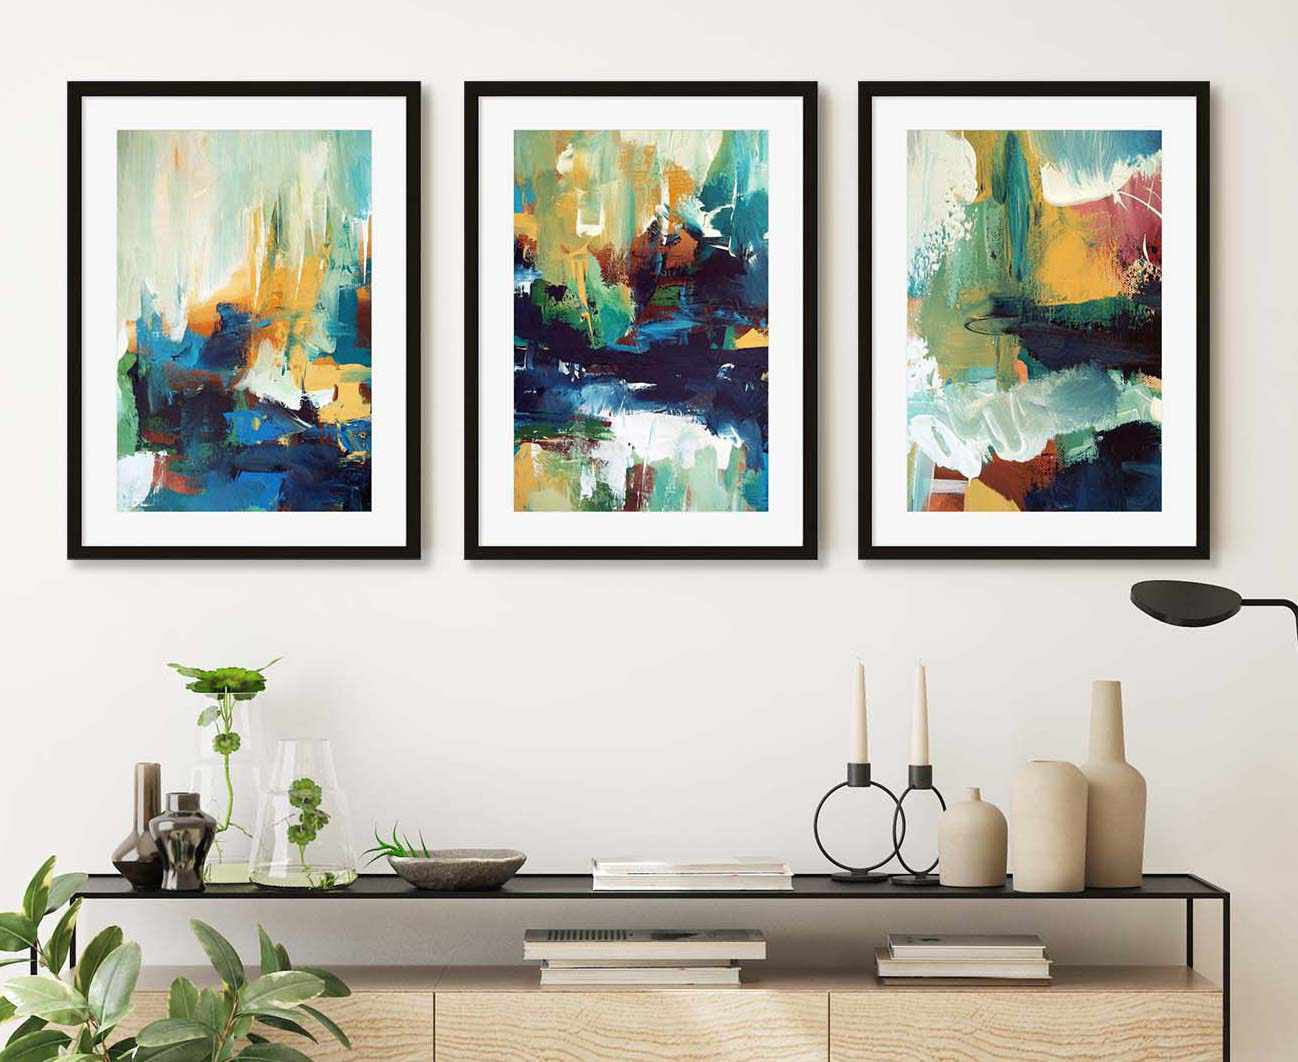 The Best Abstract Artworks To Buy In 2021 - Abstract House